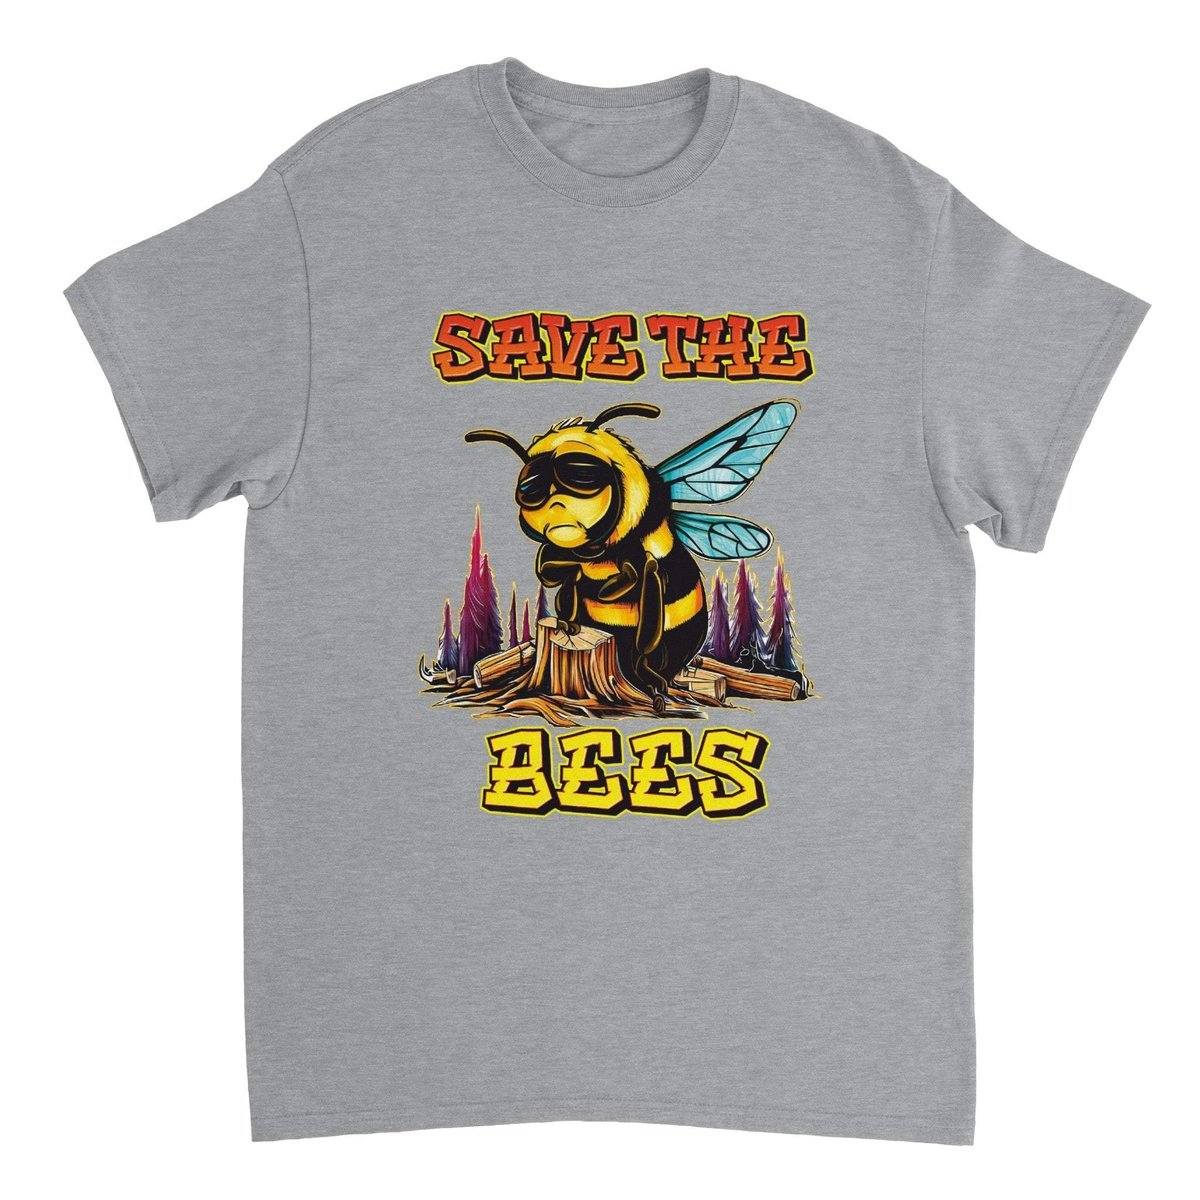 Save The Bees Tshirt - Crying Bee - Unisex Crewneck T-shirt Australia Online Color Sports Grey / S